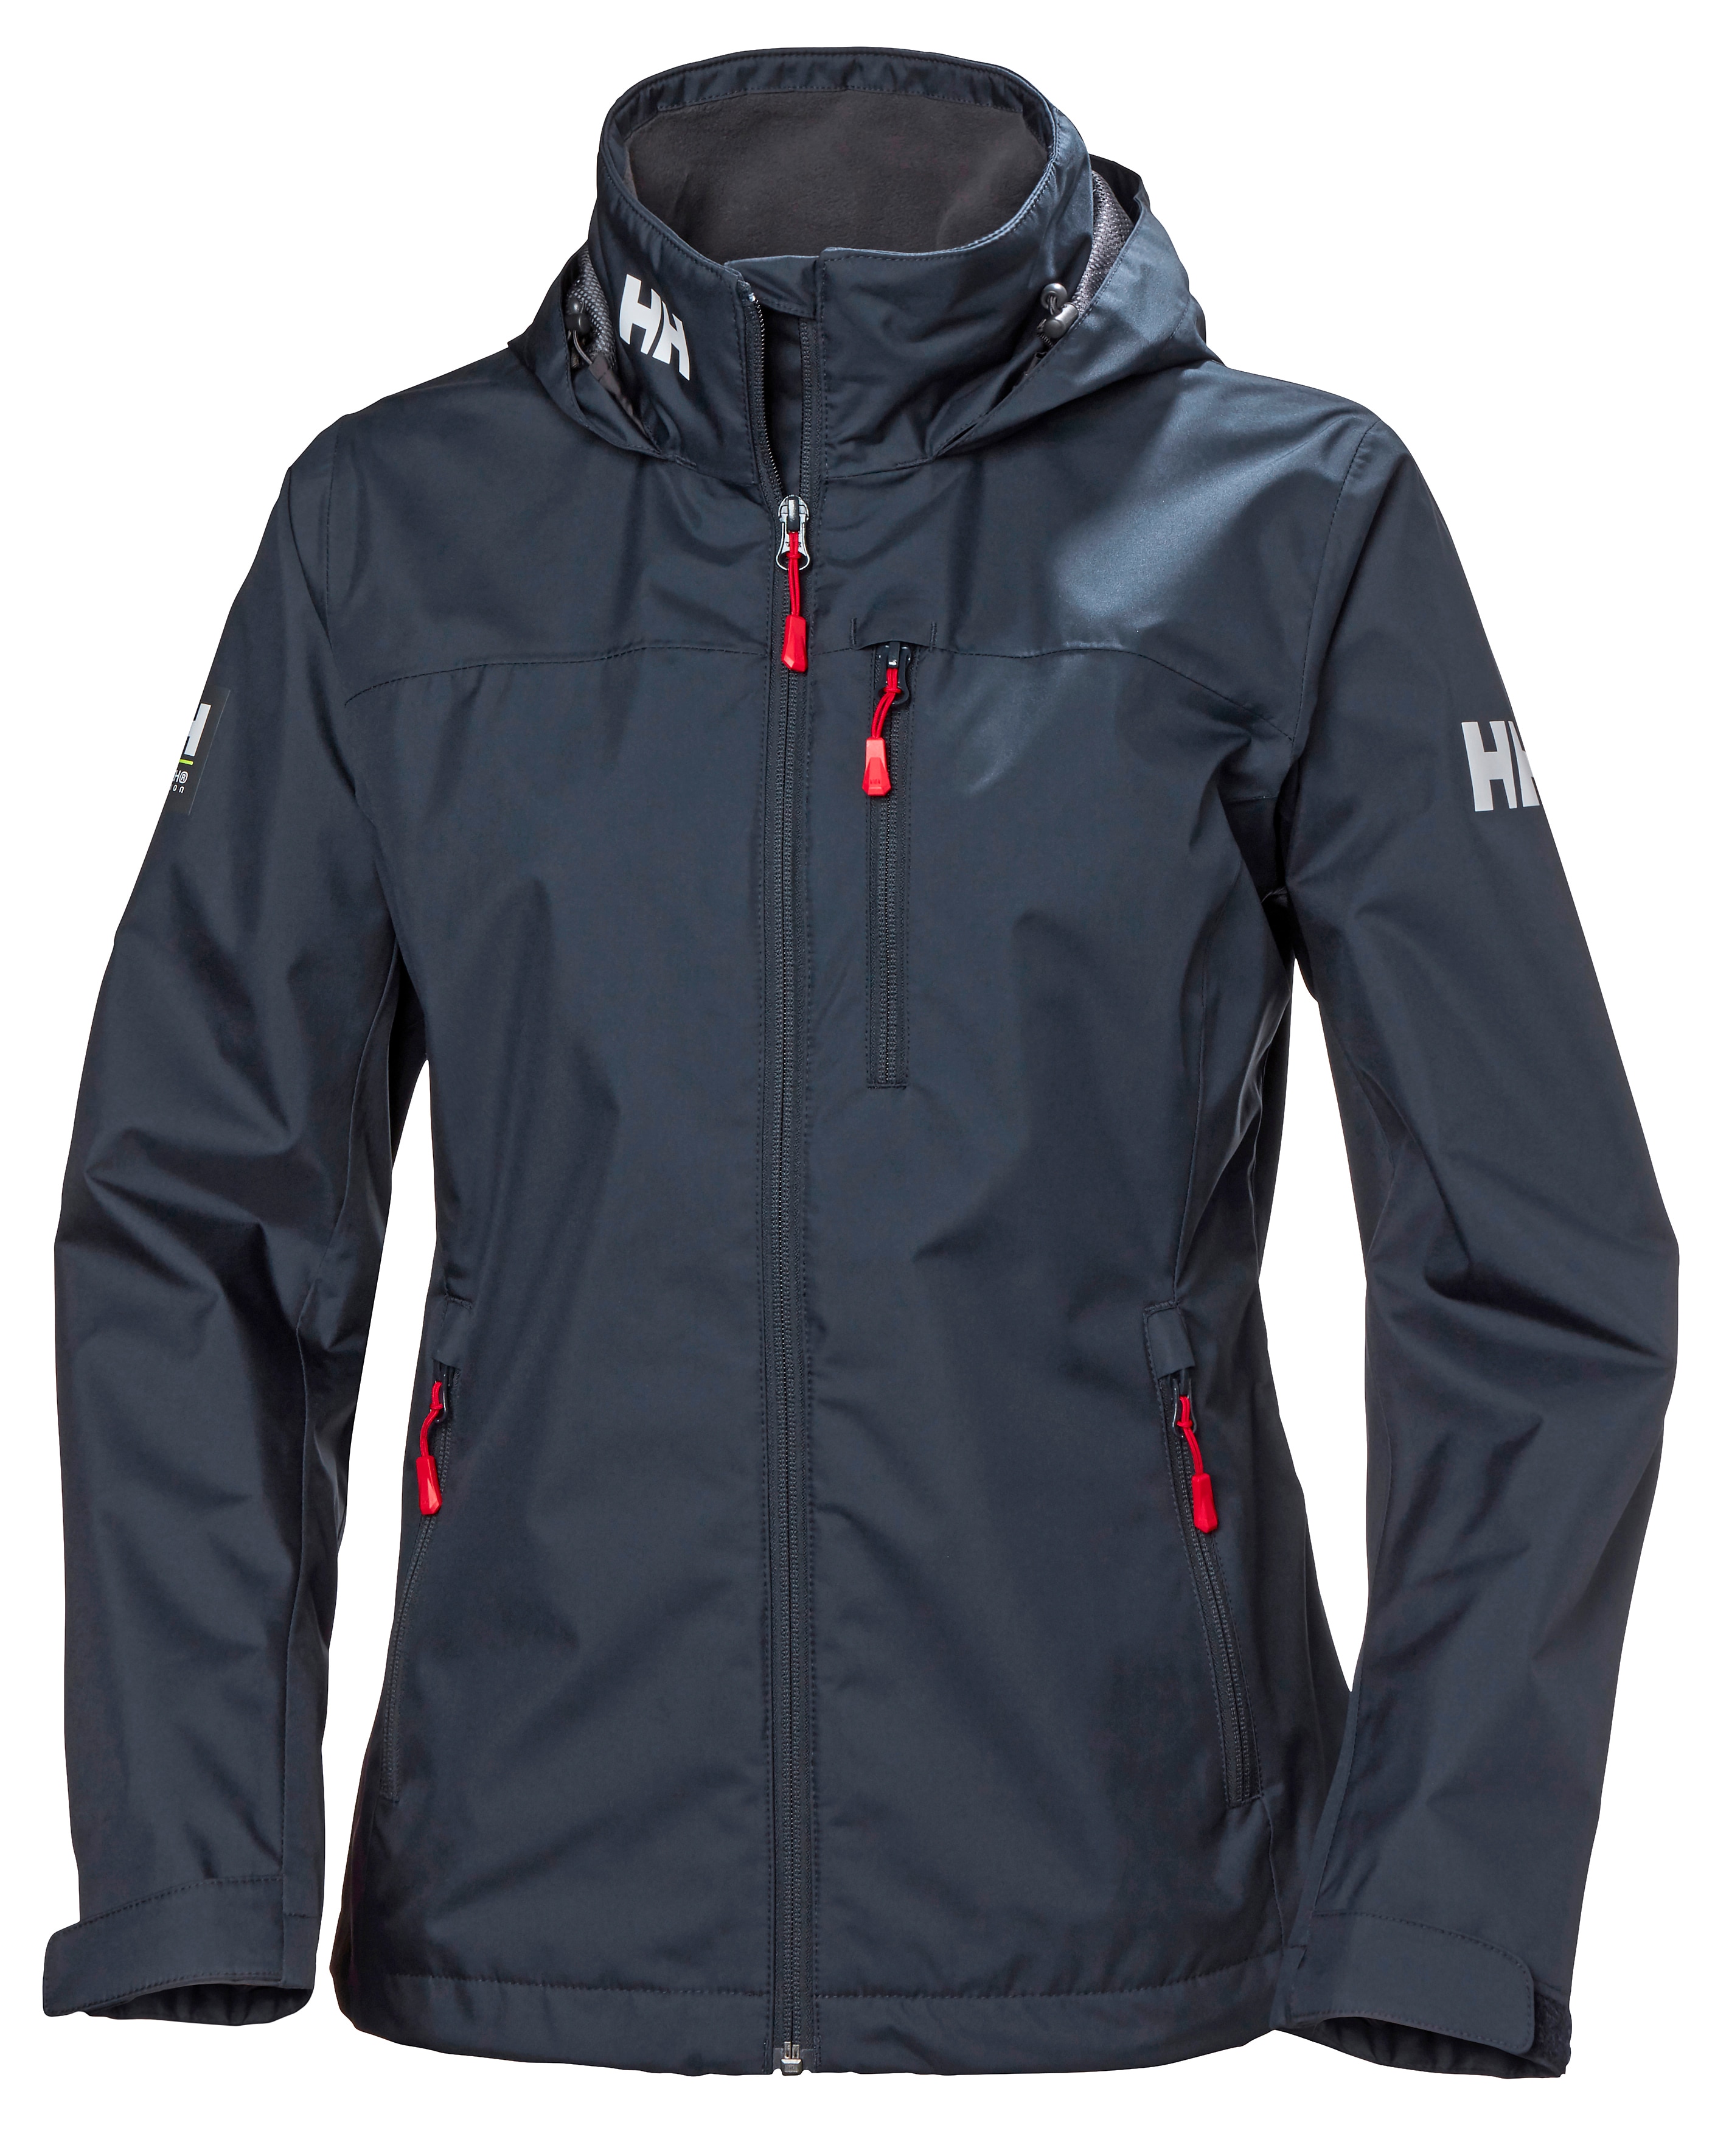 Helly Hansen Crew Hooded Sailing Jacket, dame